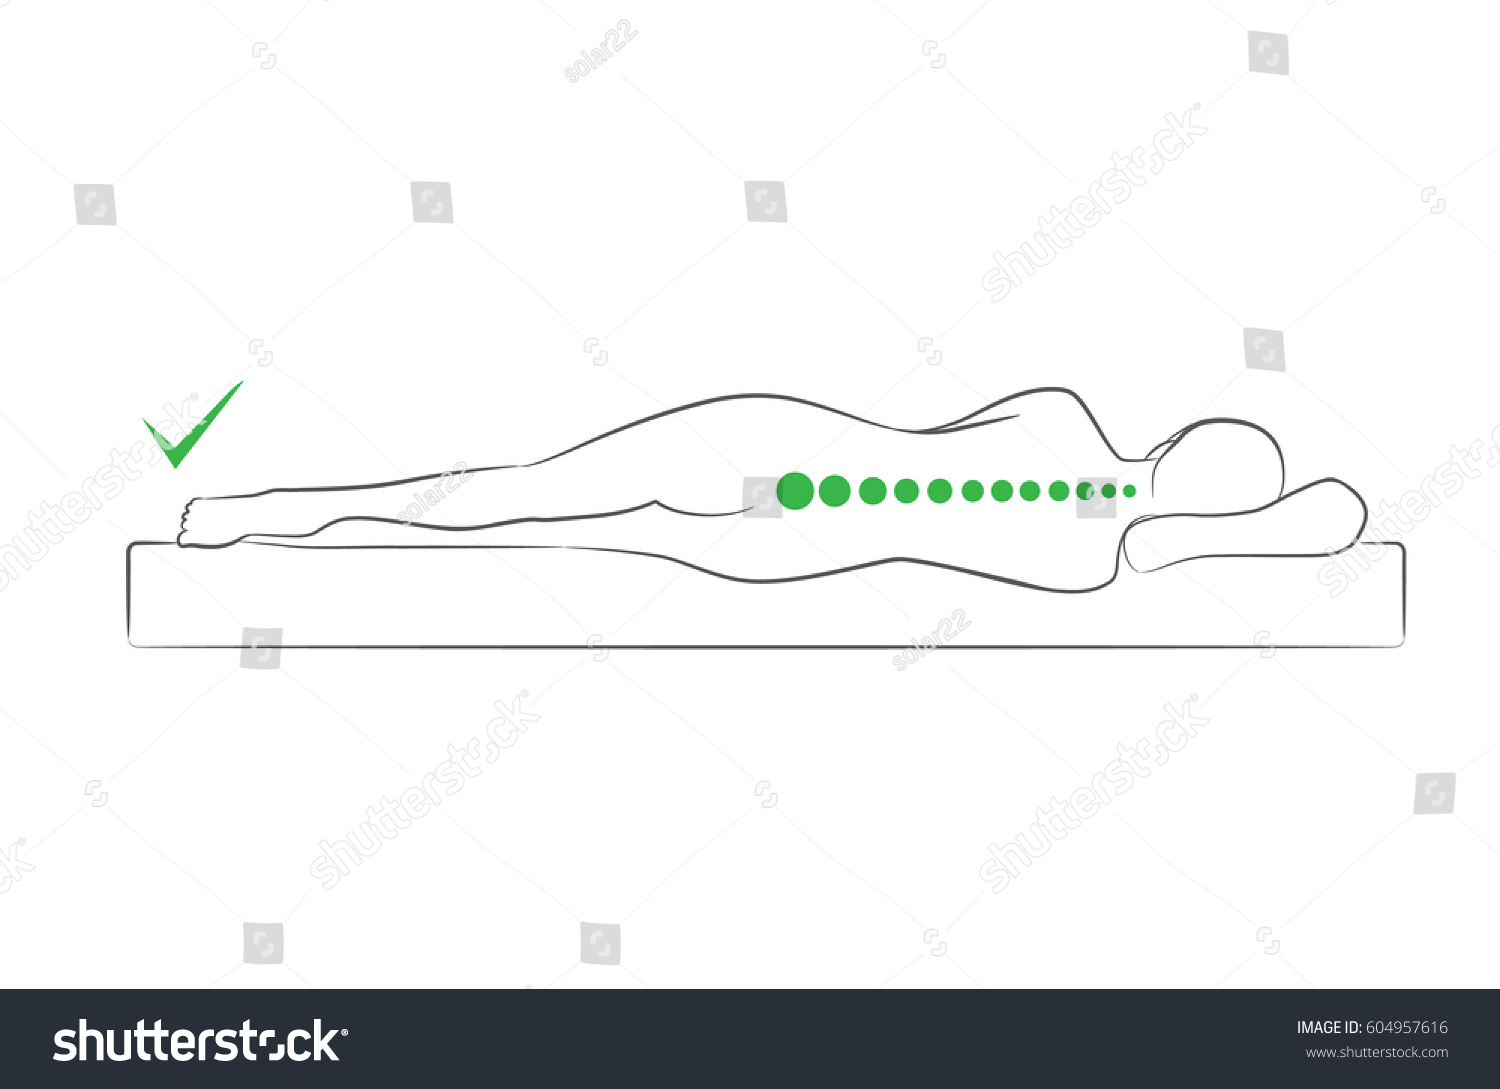 SVG of The correct spine alignment when sleeping by on the side sleeping position.
 svg